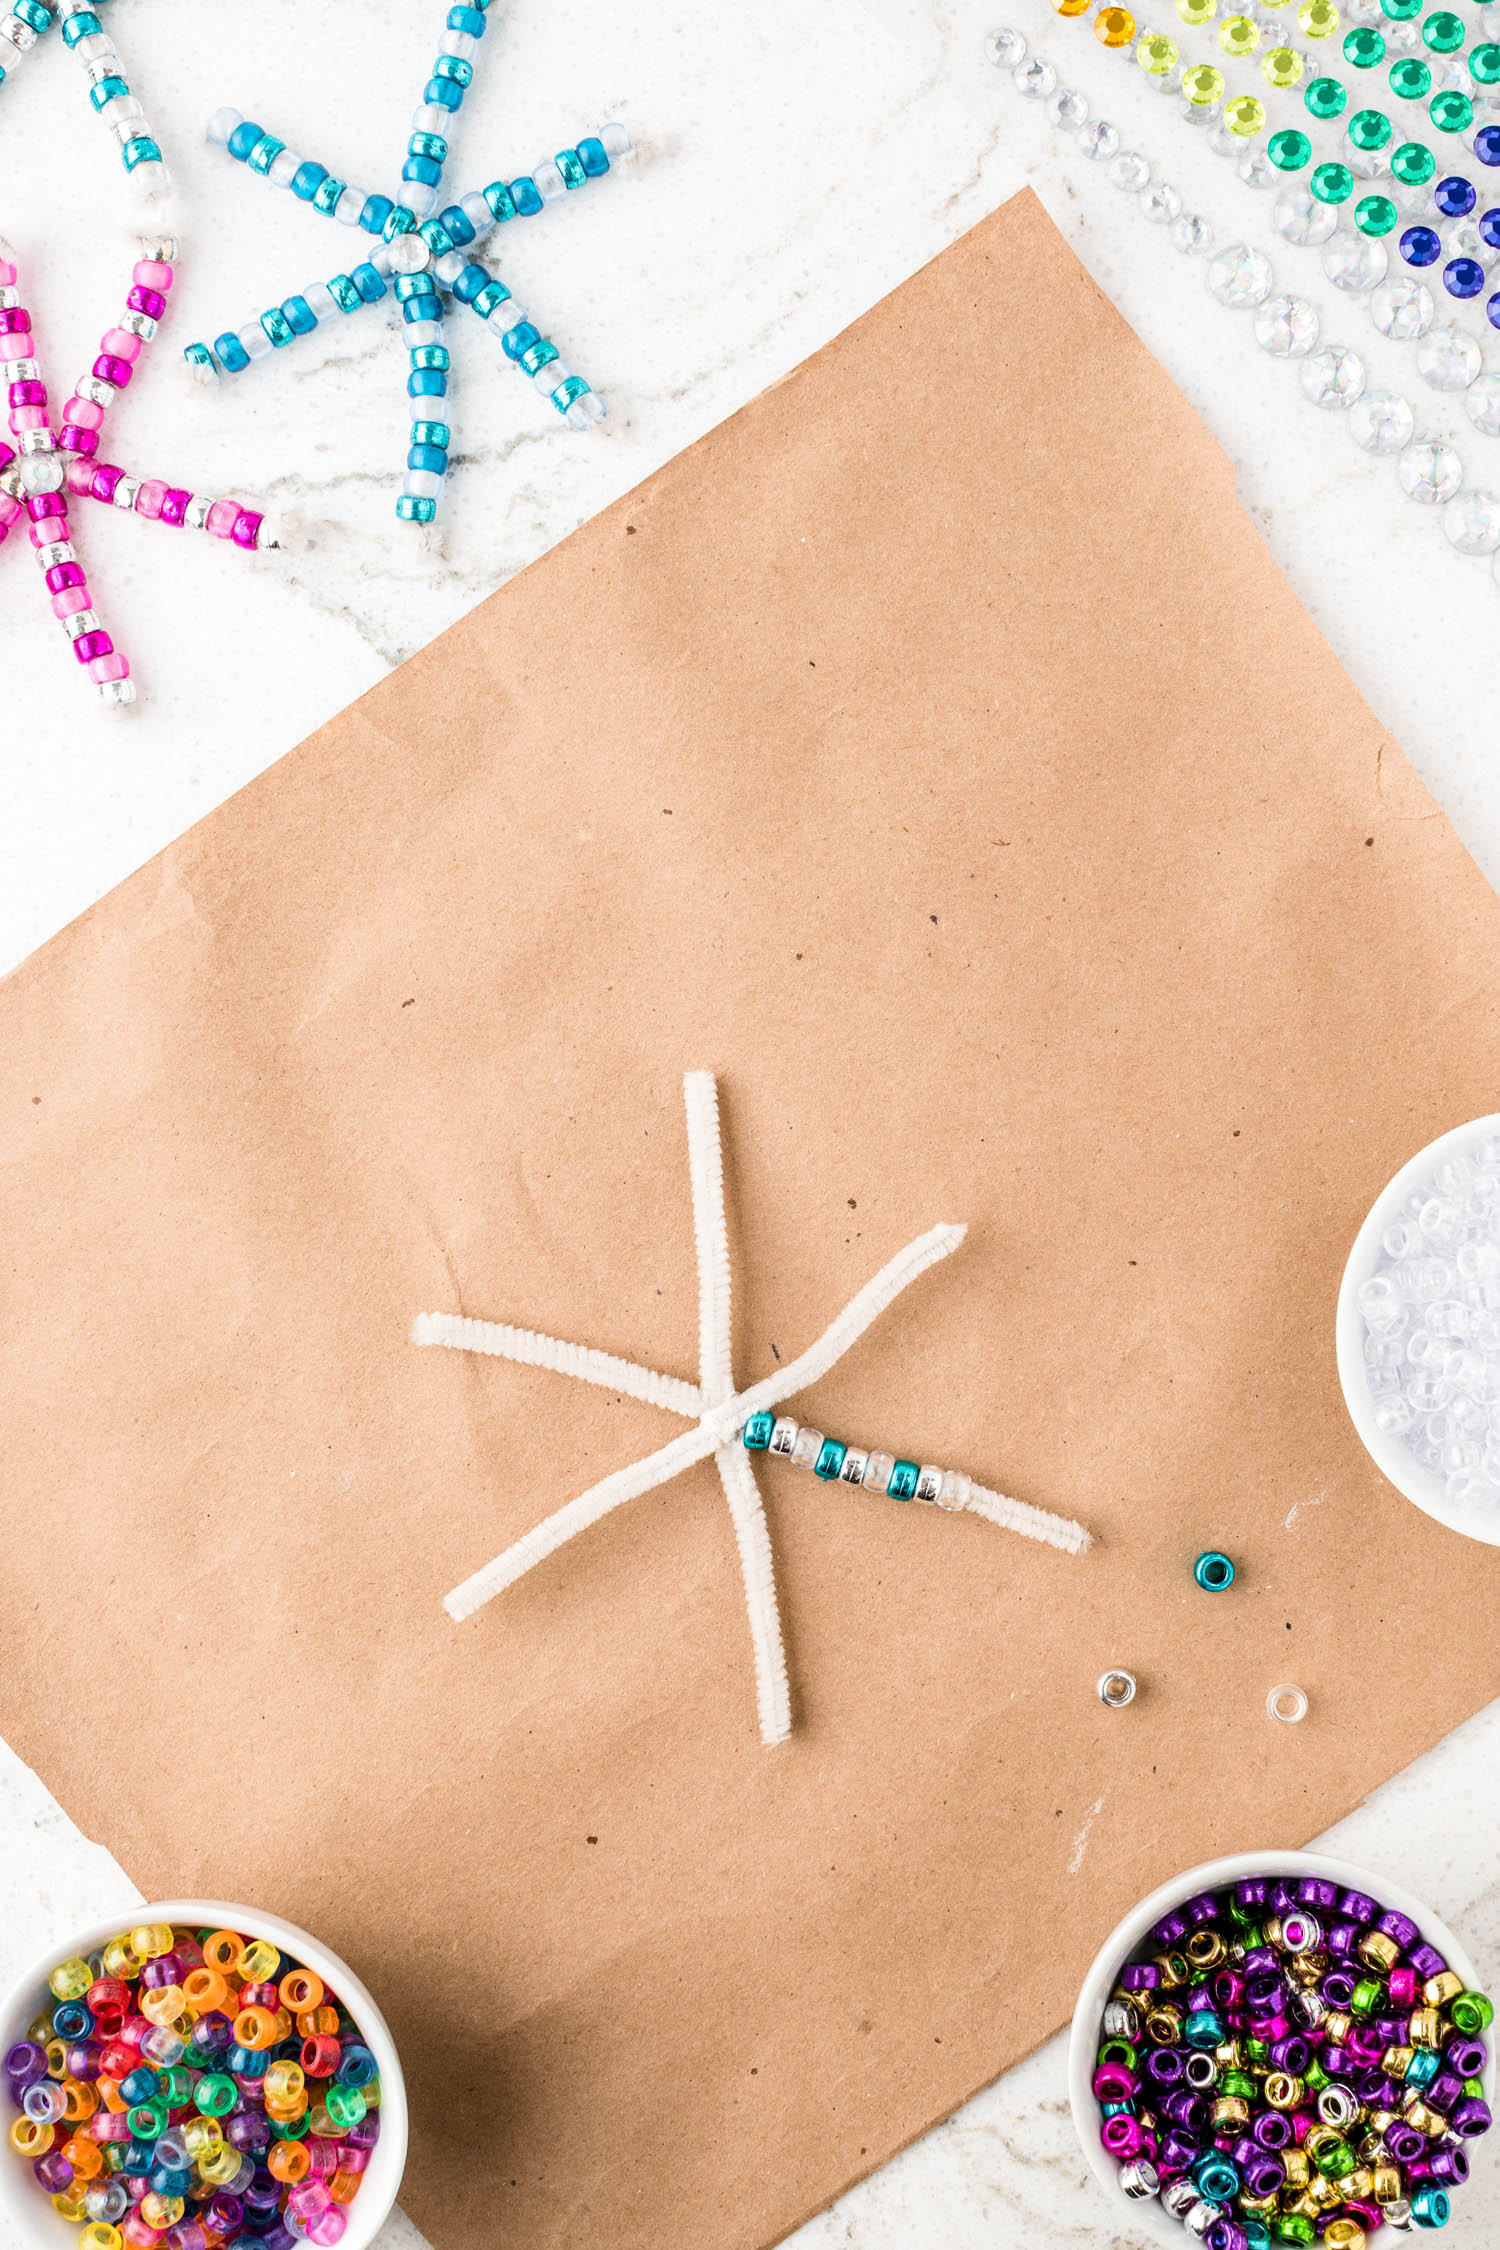 Adding Beads to Snowflake Pipe Cleaner